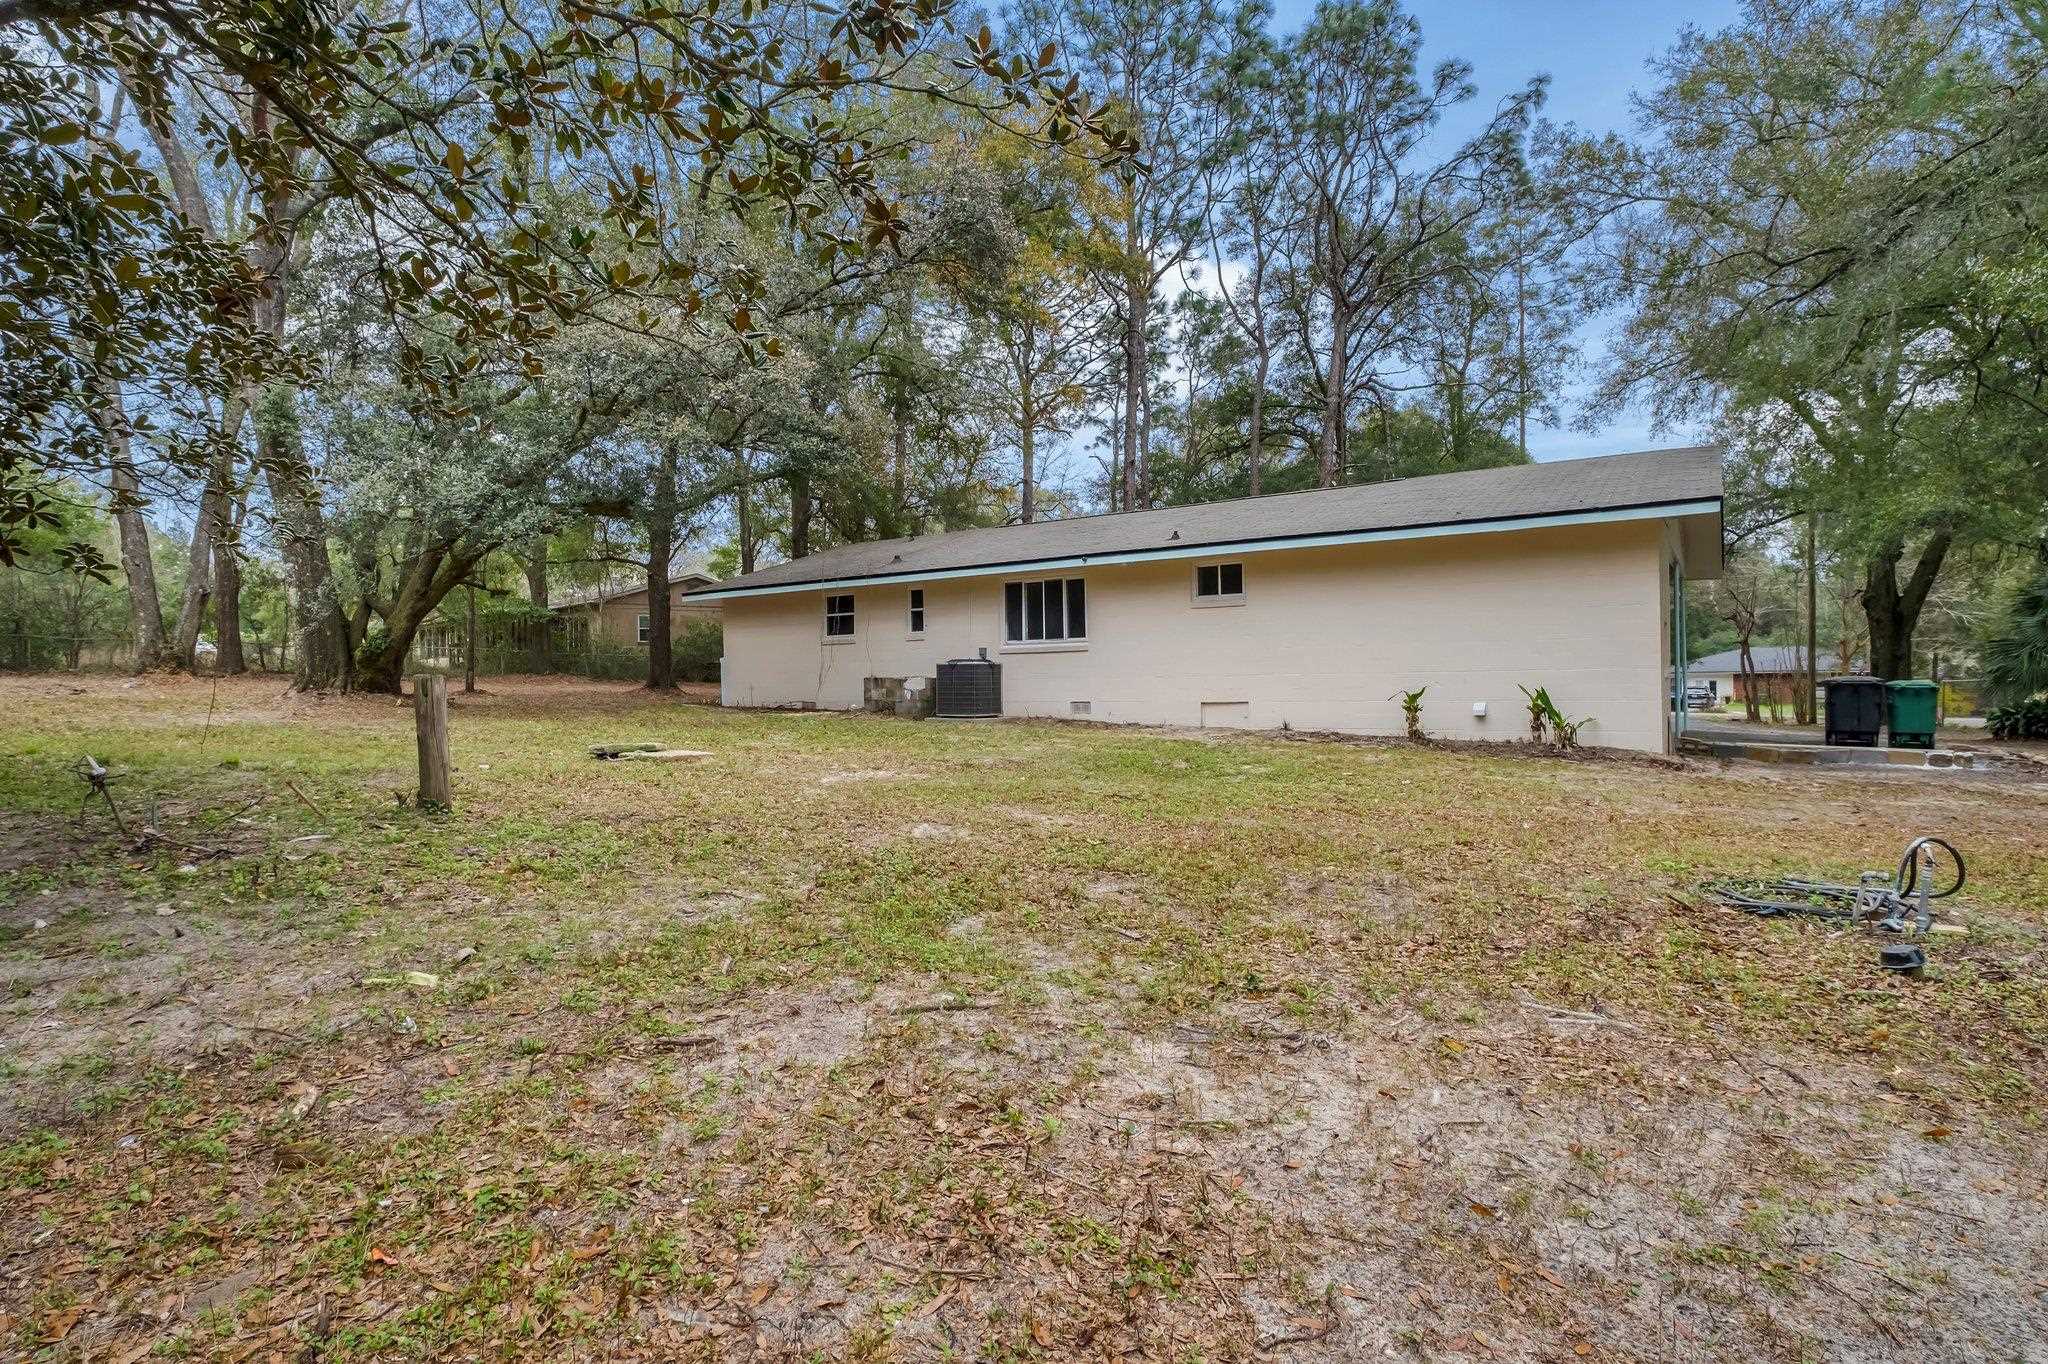 520 Patty Lynn Drive,TALLAHASSEE,Florida 32305,3 Bedrooms Bedrooms,2 BathroomsBathrooms,Detached single family,520 Patty Lynn Drive,369923